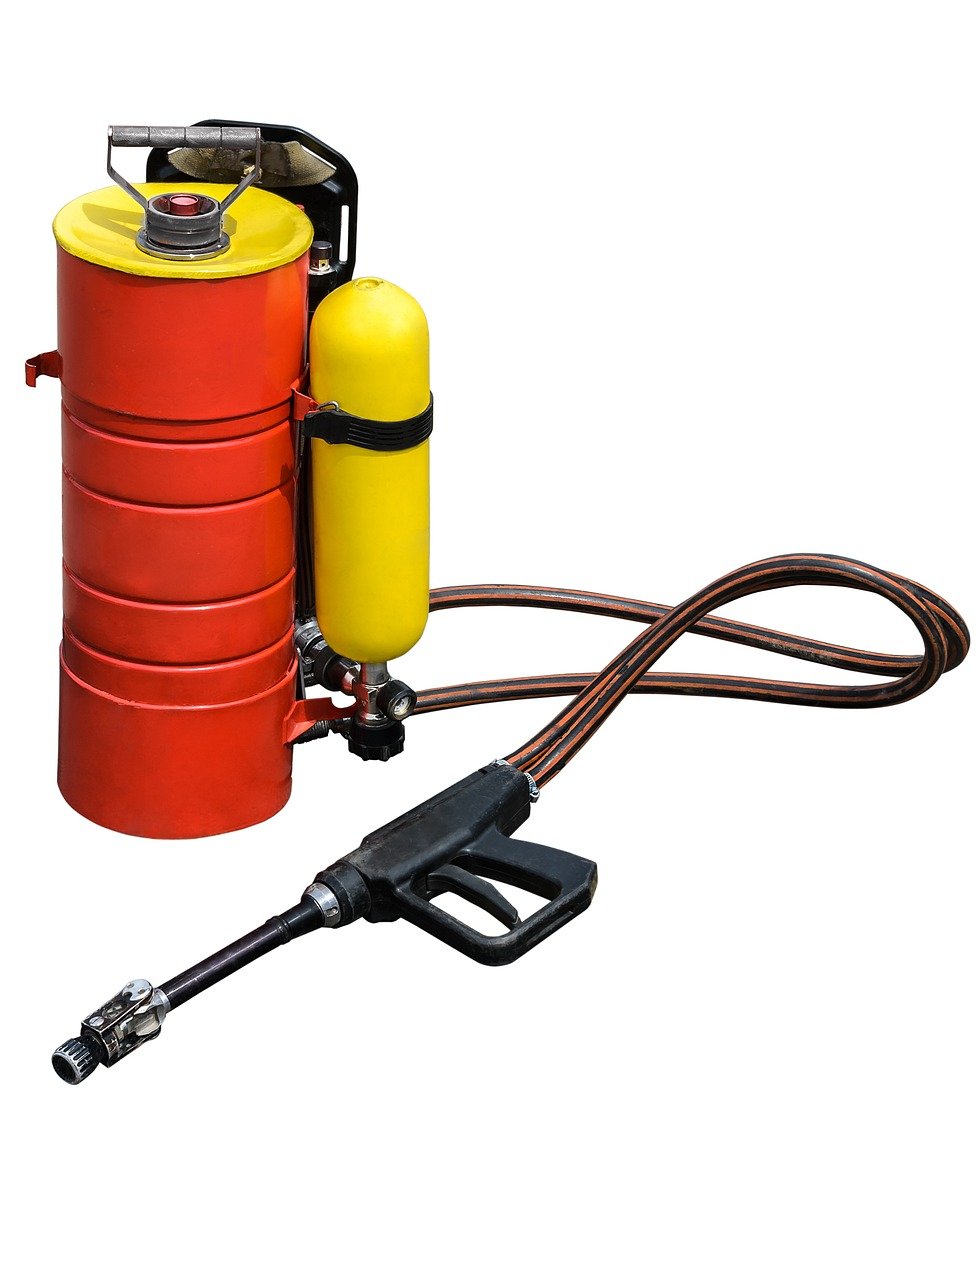 The Perfect Container for Your Hose: With Lid